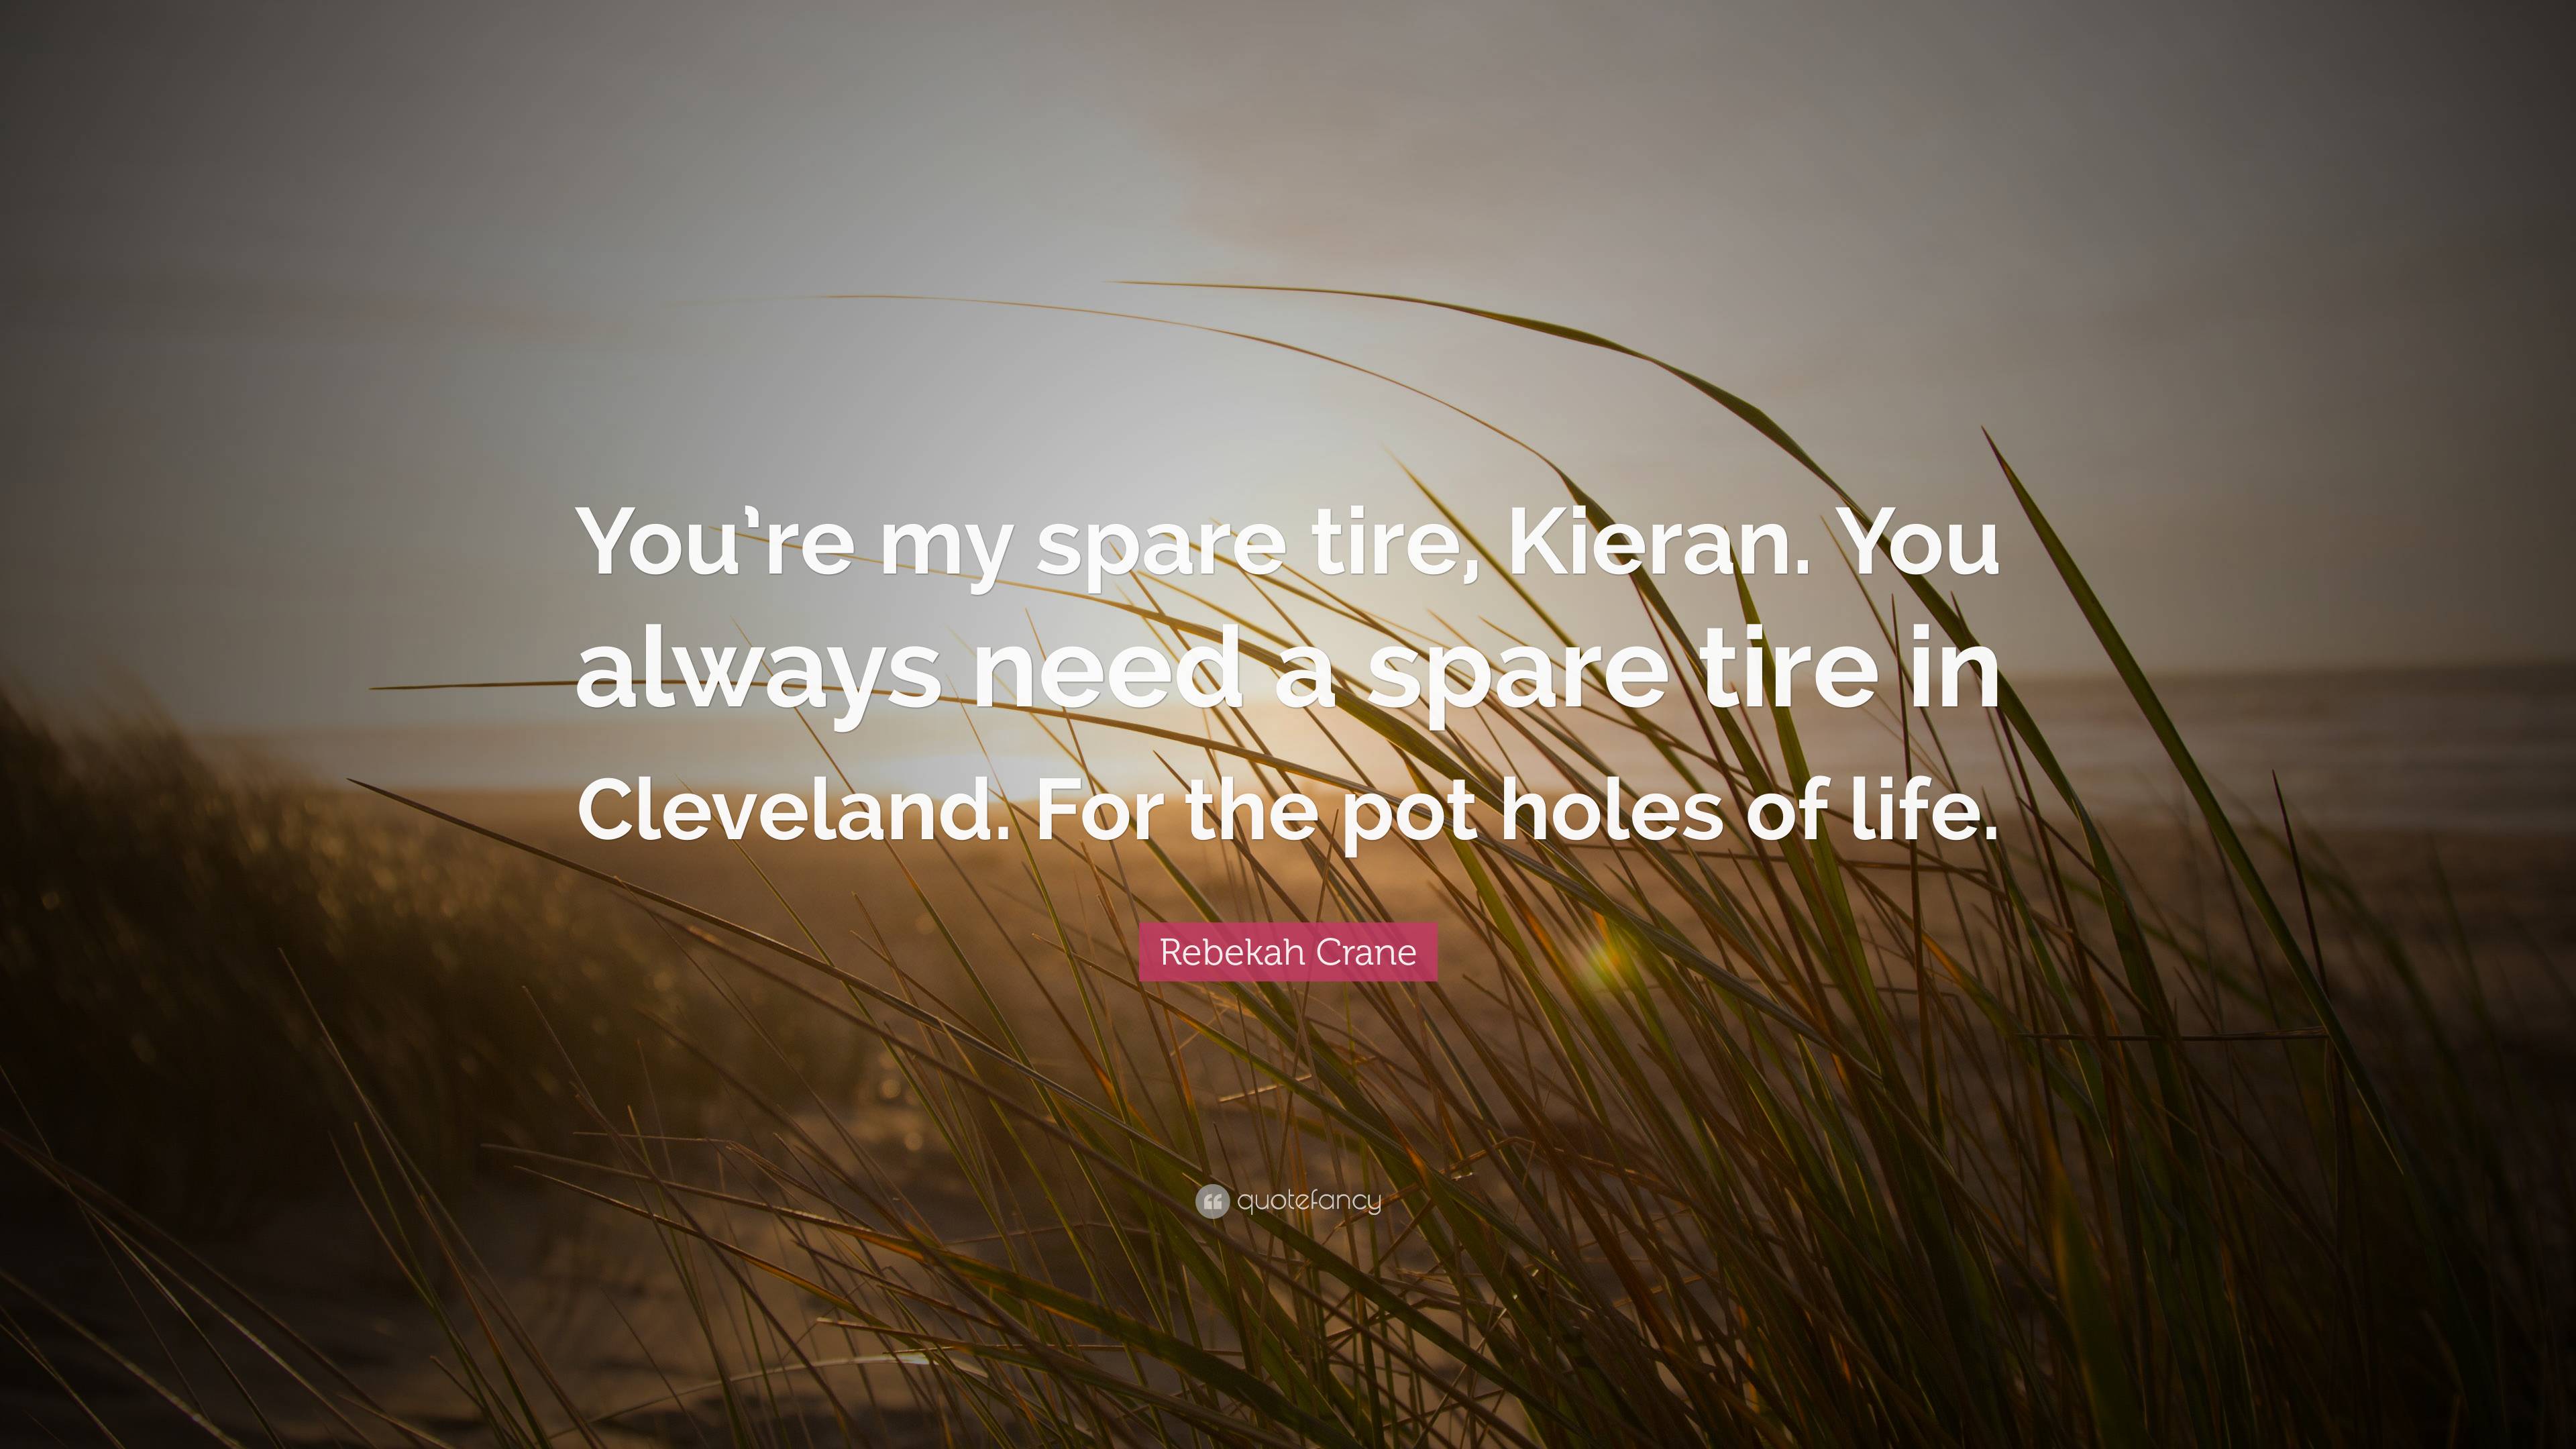 Rebekah Crane Quote: “You’re my spare tire, Kieran. You always need a ...